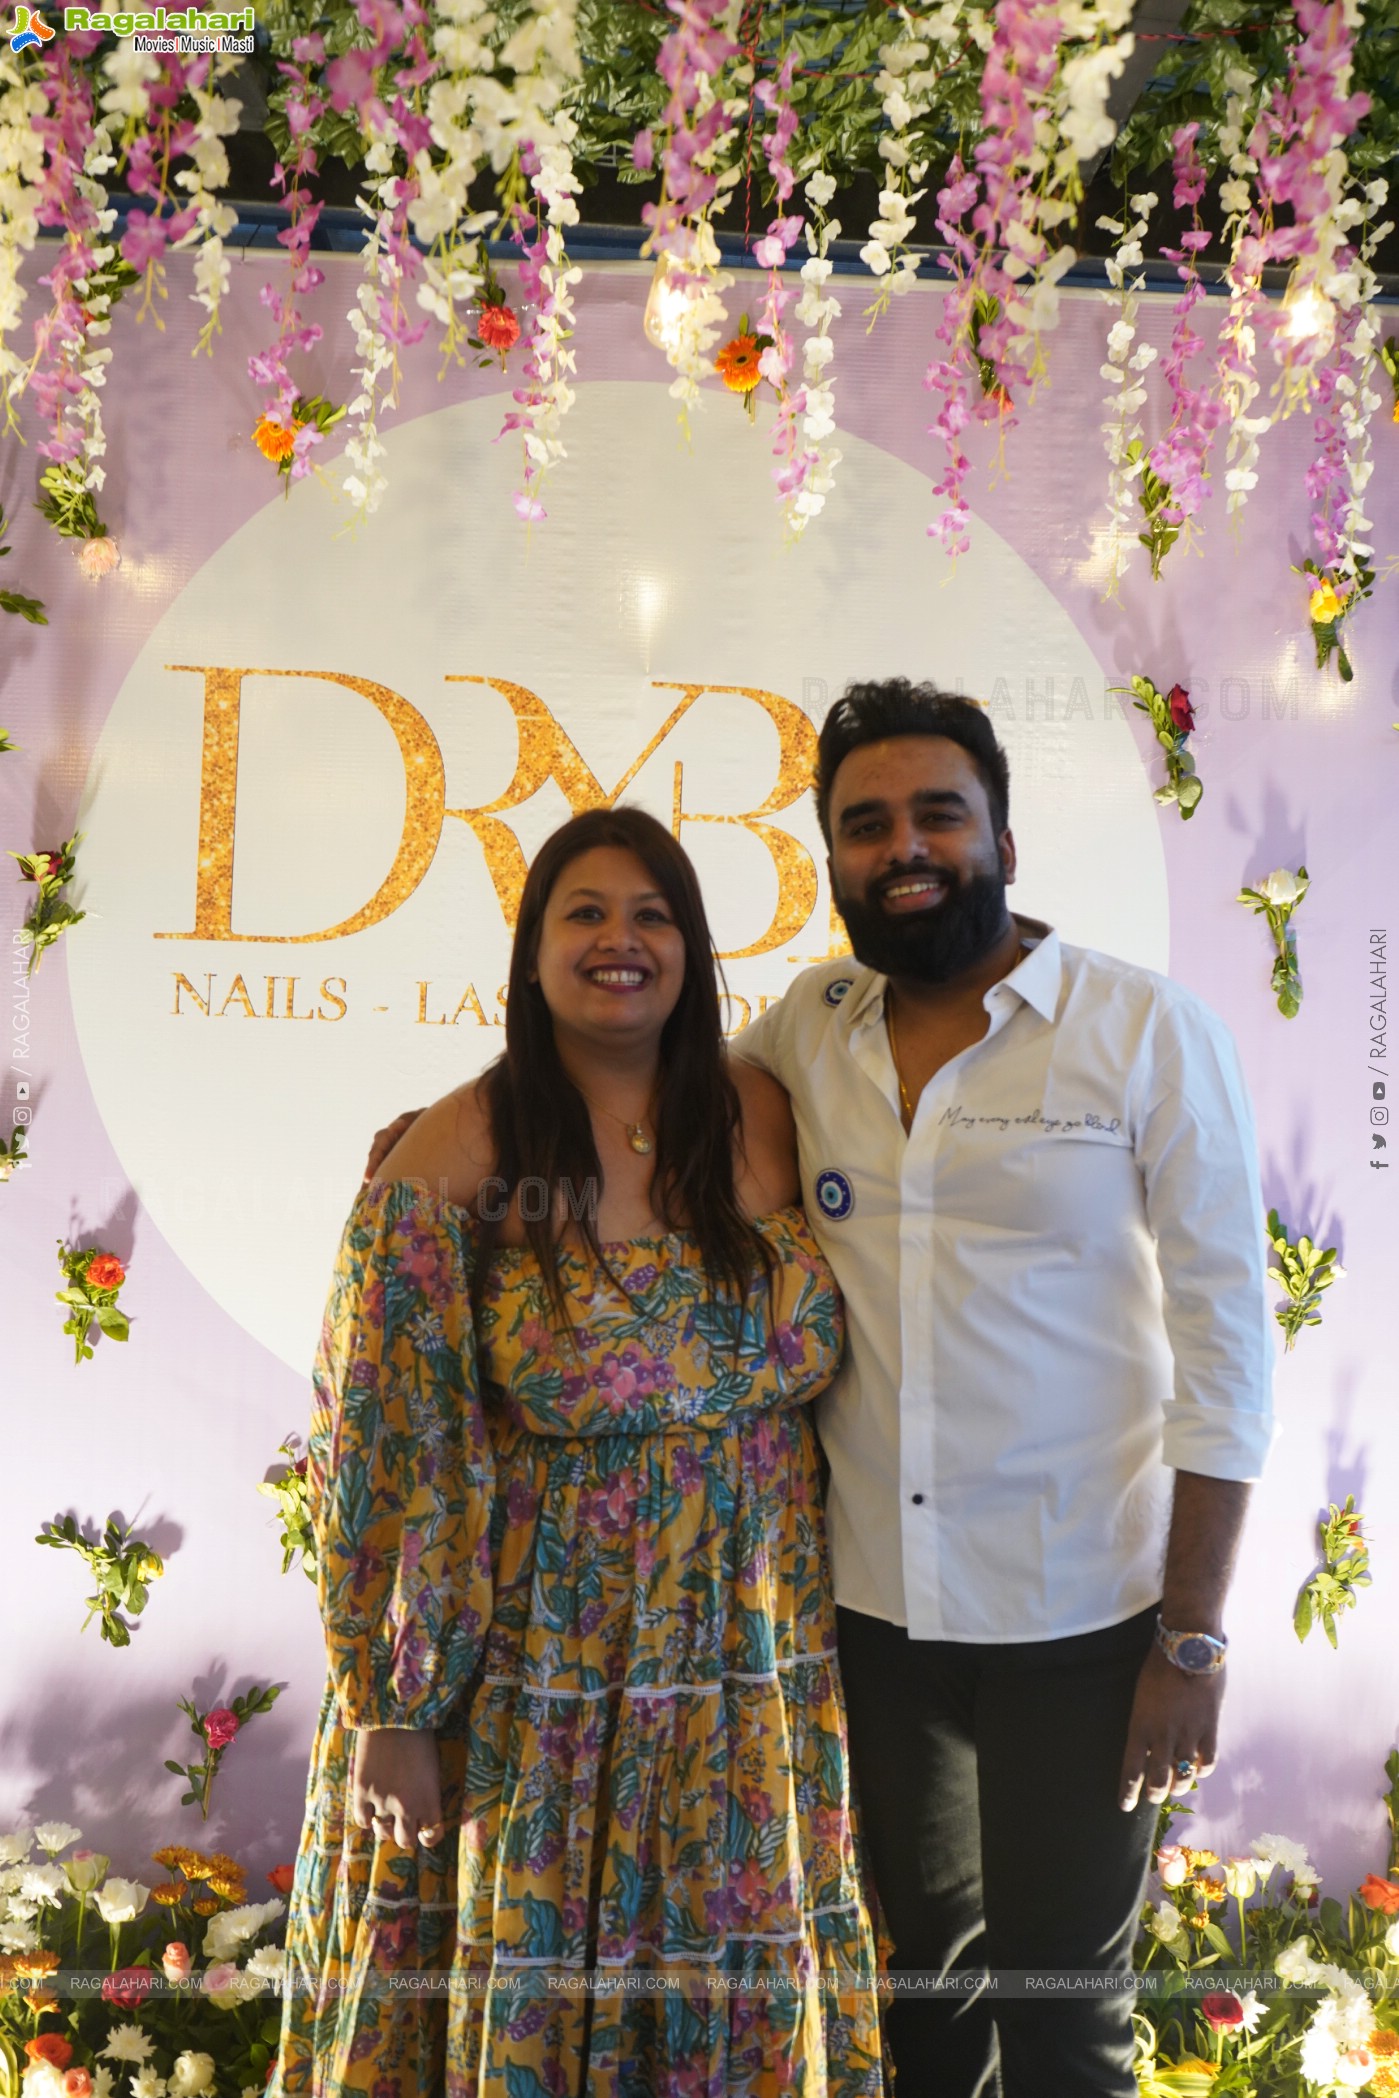 Dryby Amogha Allure Second Branch Inauguration Event, Hyderabad